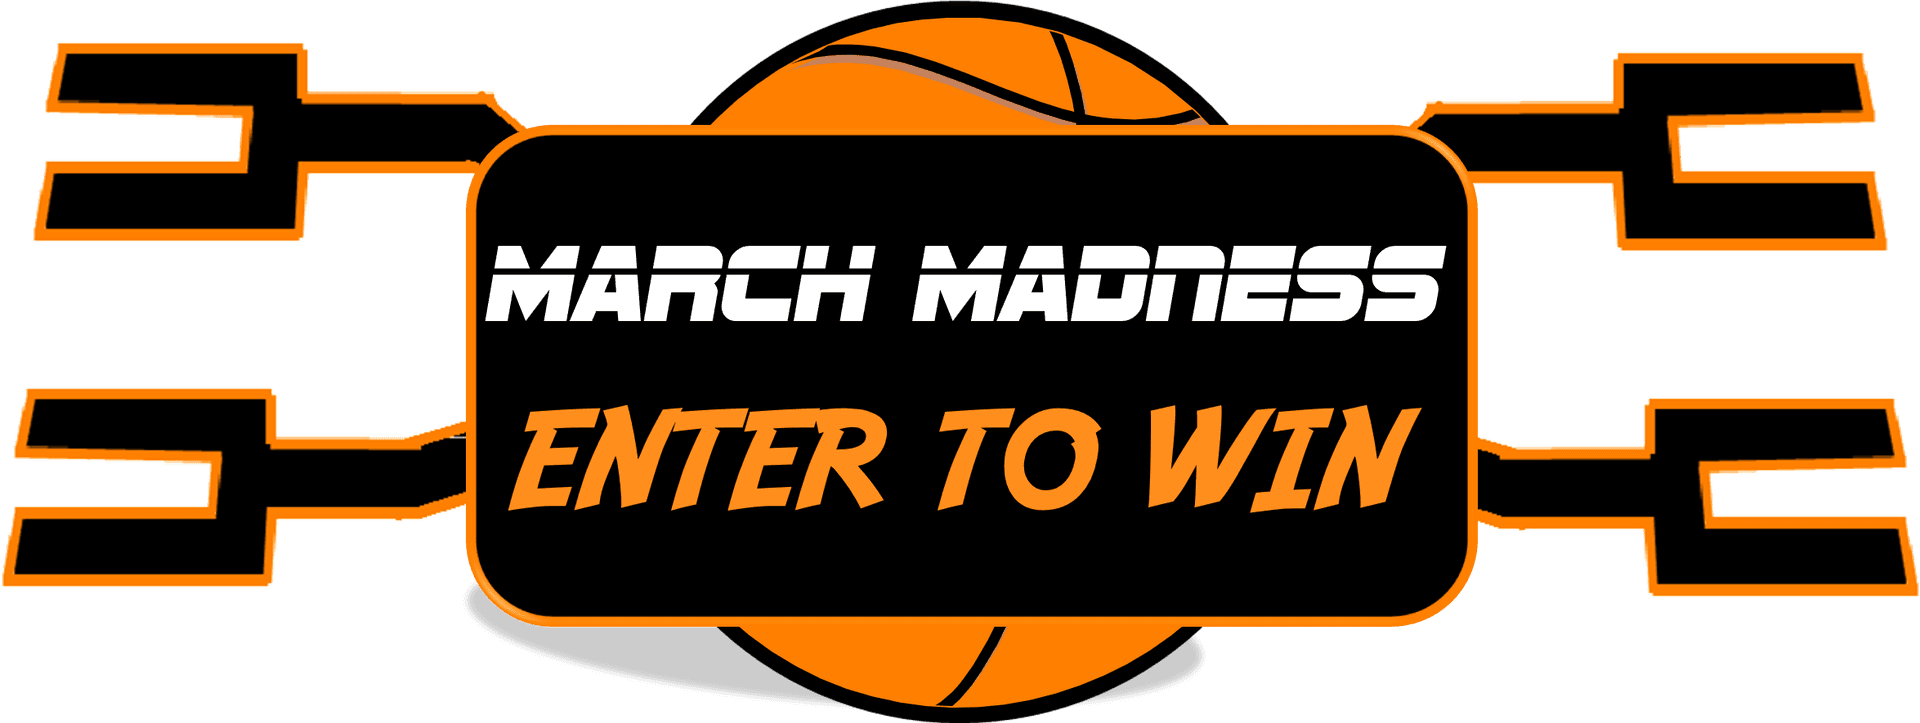 March Madness Enter To Win Banner PNG